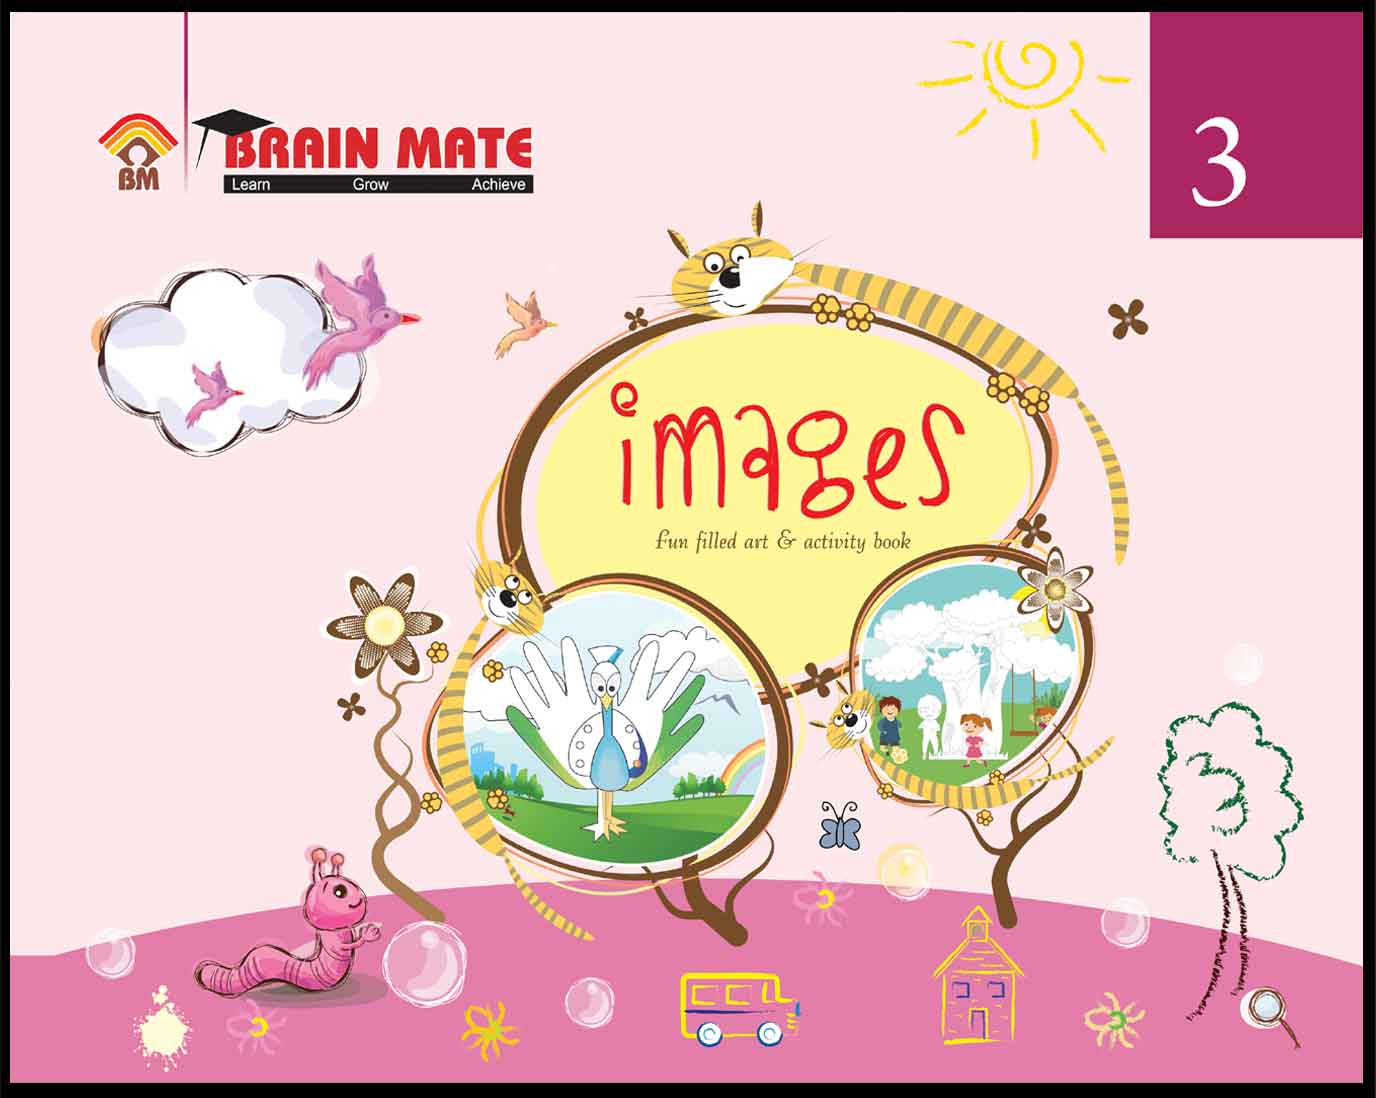 brainmate of Images_3